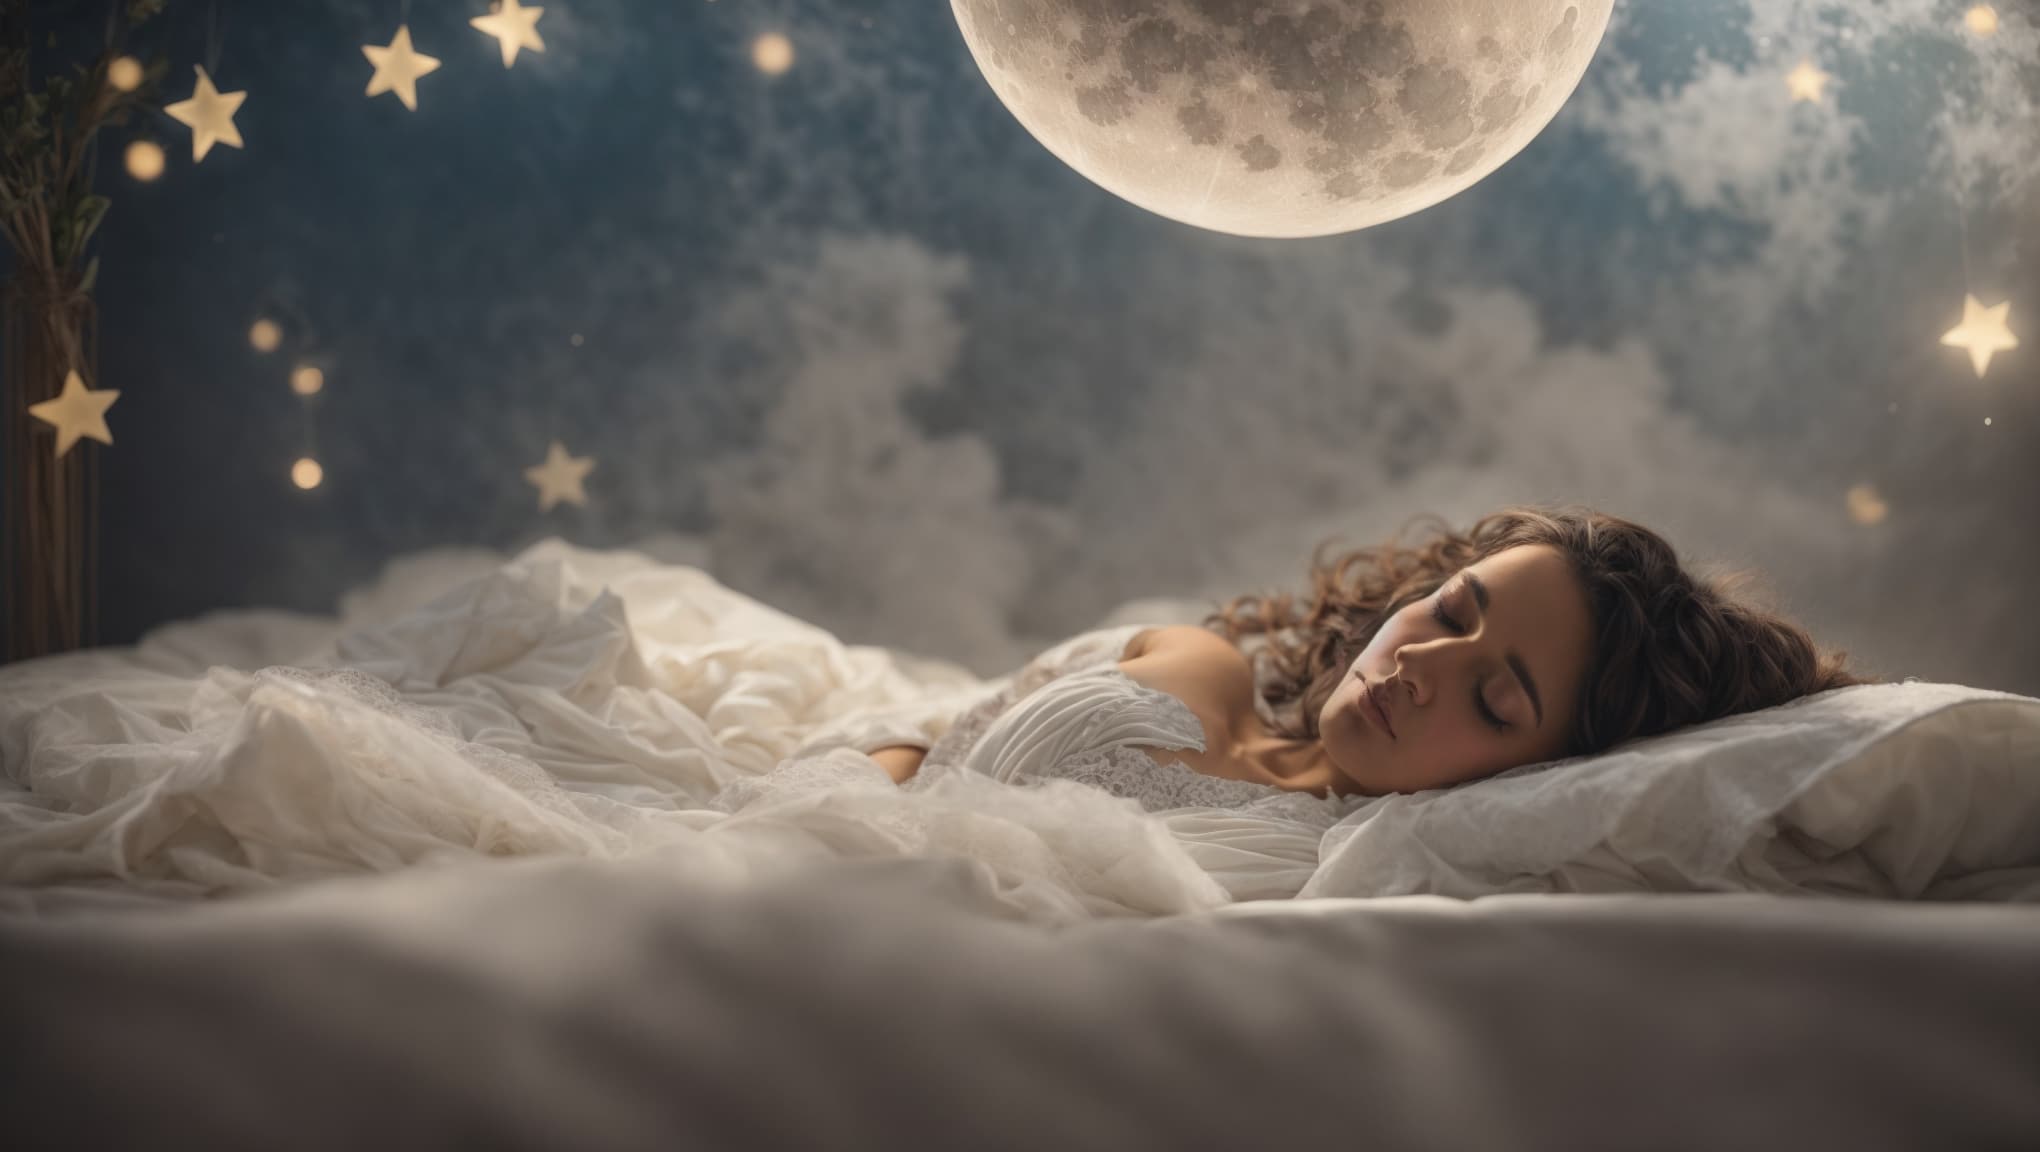 A person sleeps with a dream cloud above showing tarot cards The Moon, The High Priestess, and The Star for tarot card interpretation in dreams, all in gentle lighting.